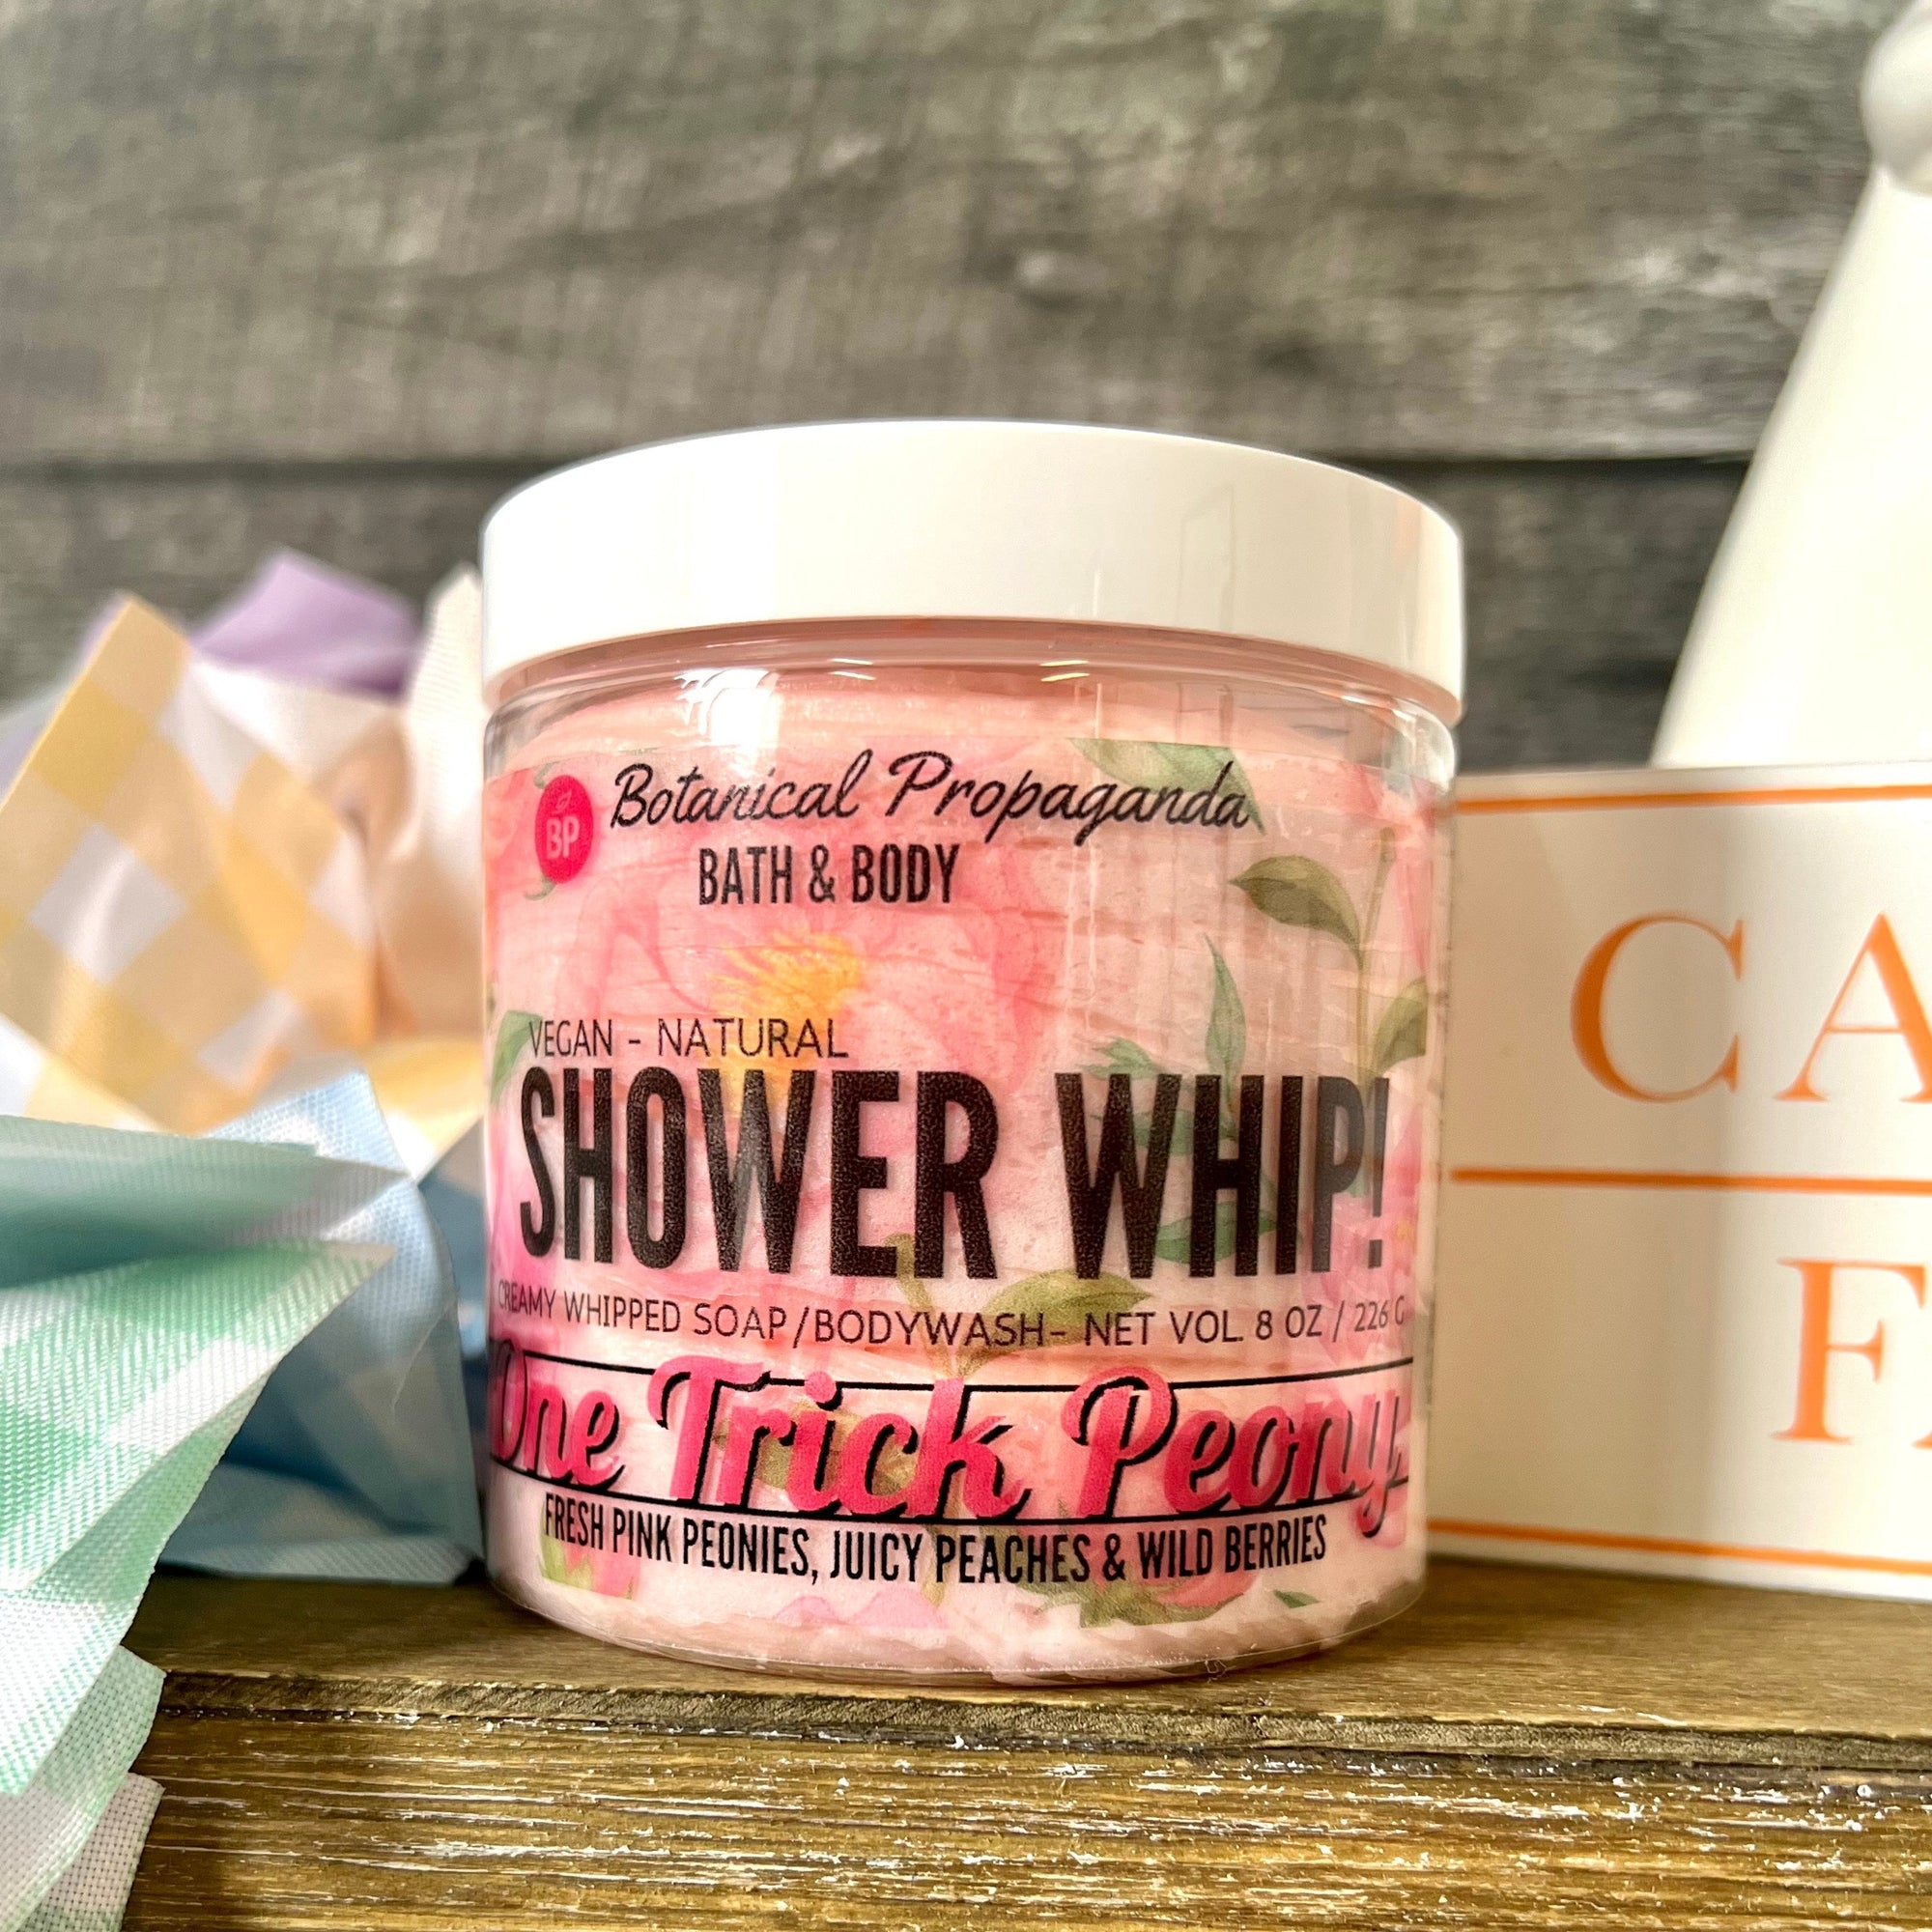 One Trick Peony Shower Whip!